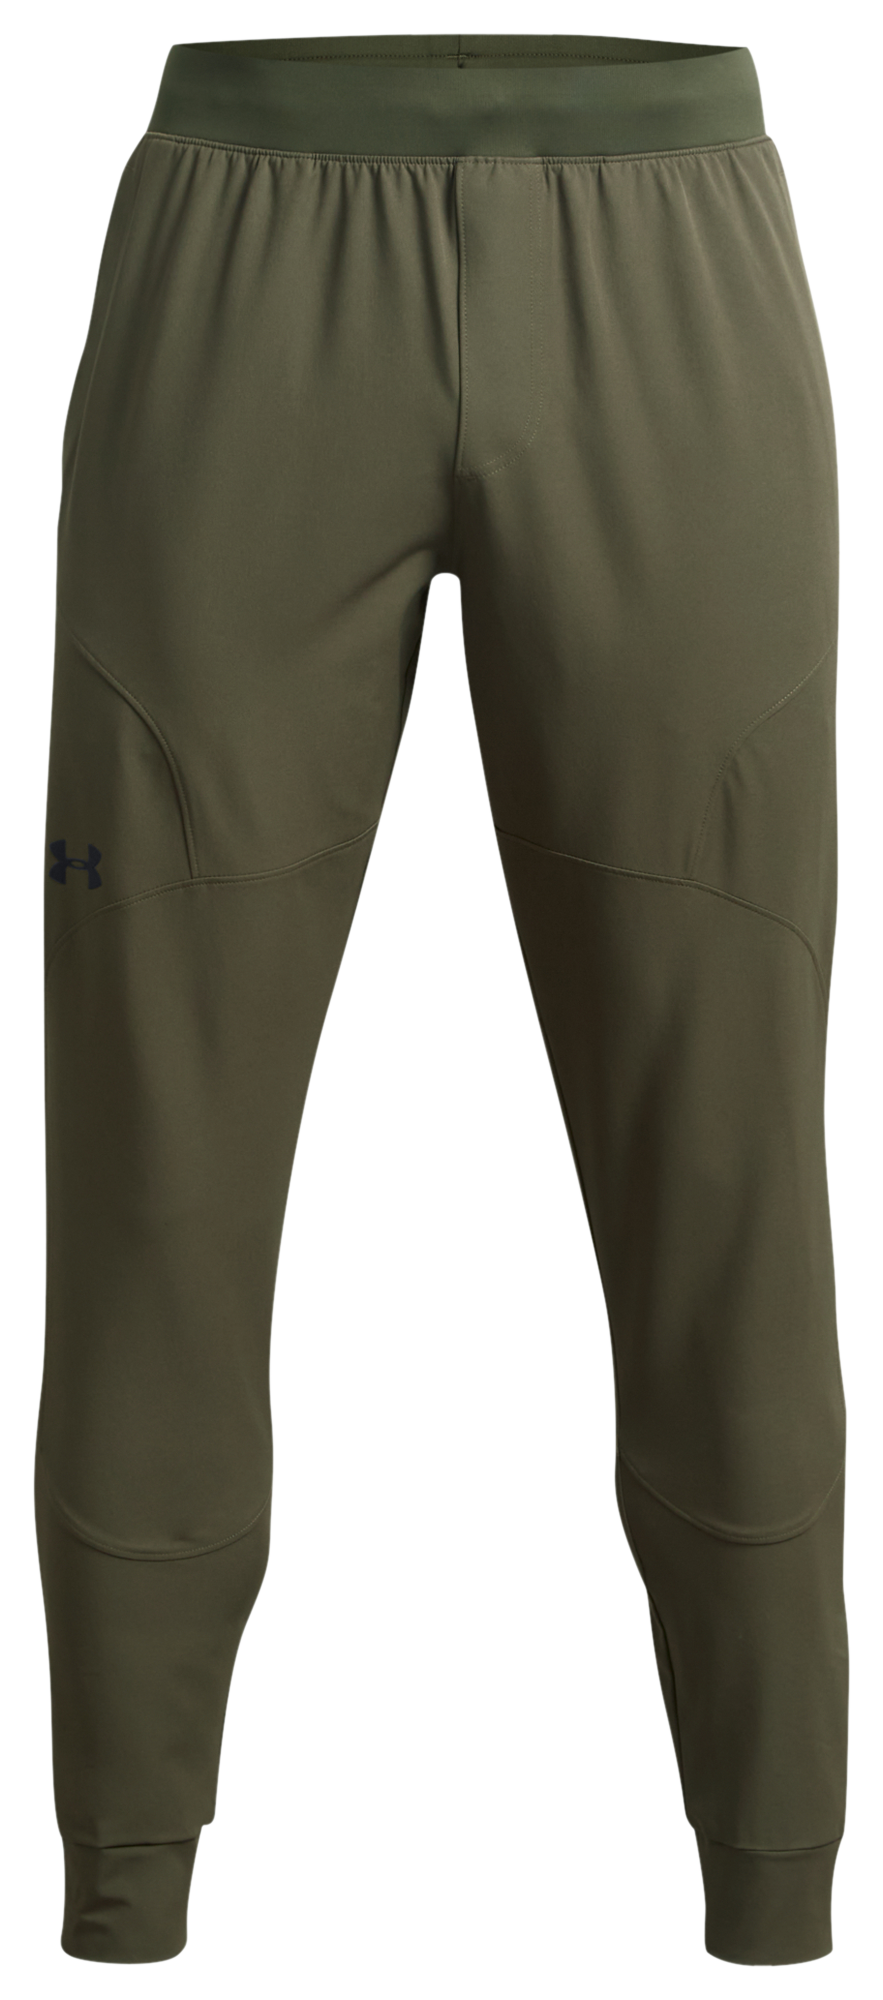 Under Armour Unstoppable Joggers - Men's